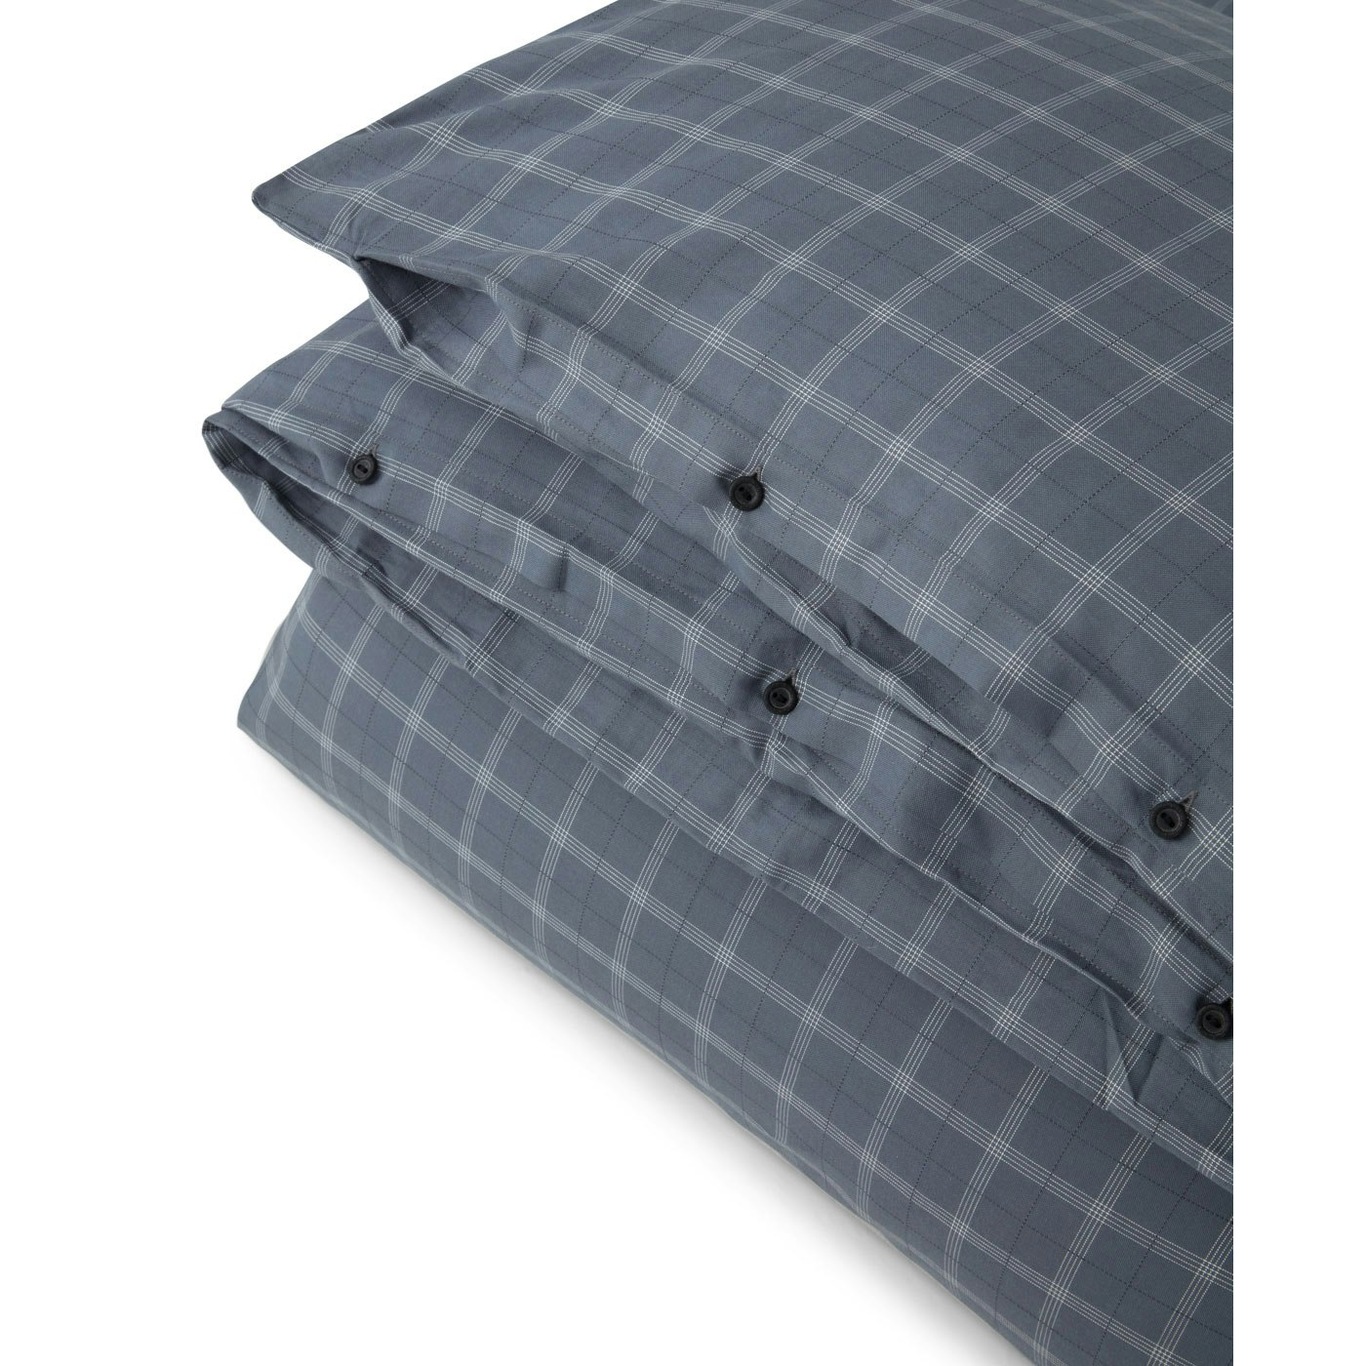 Checked Lyocell/Cotton Pin Point Oxford Duvet Cover, 150x210 cm